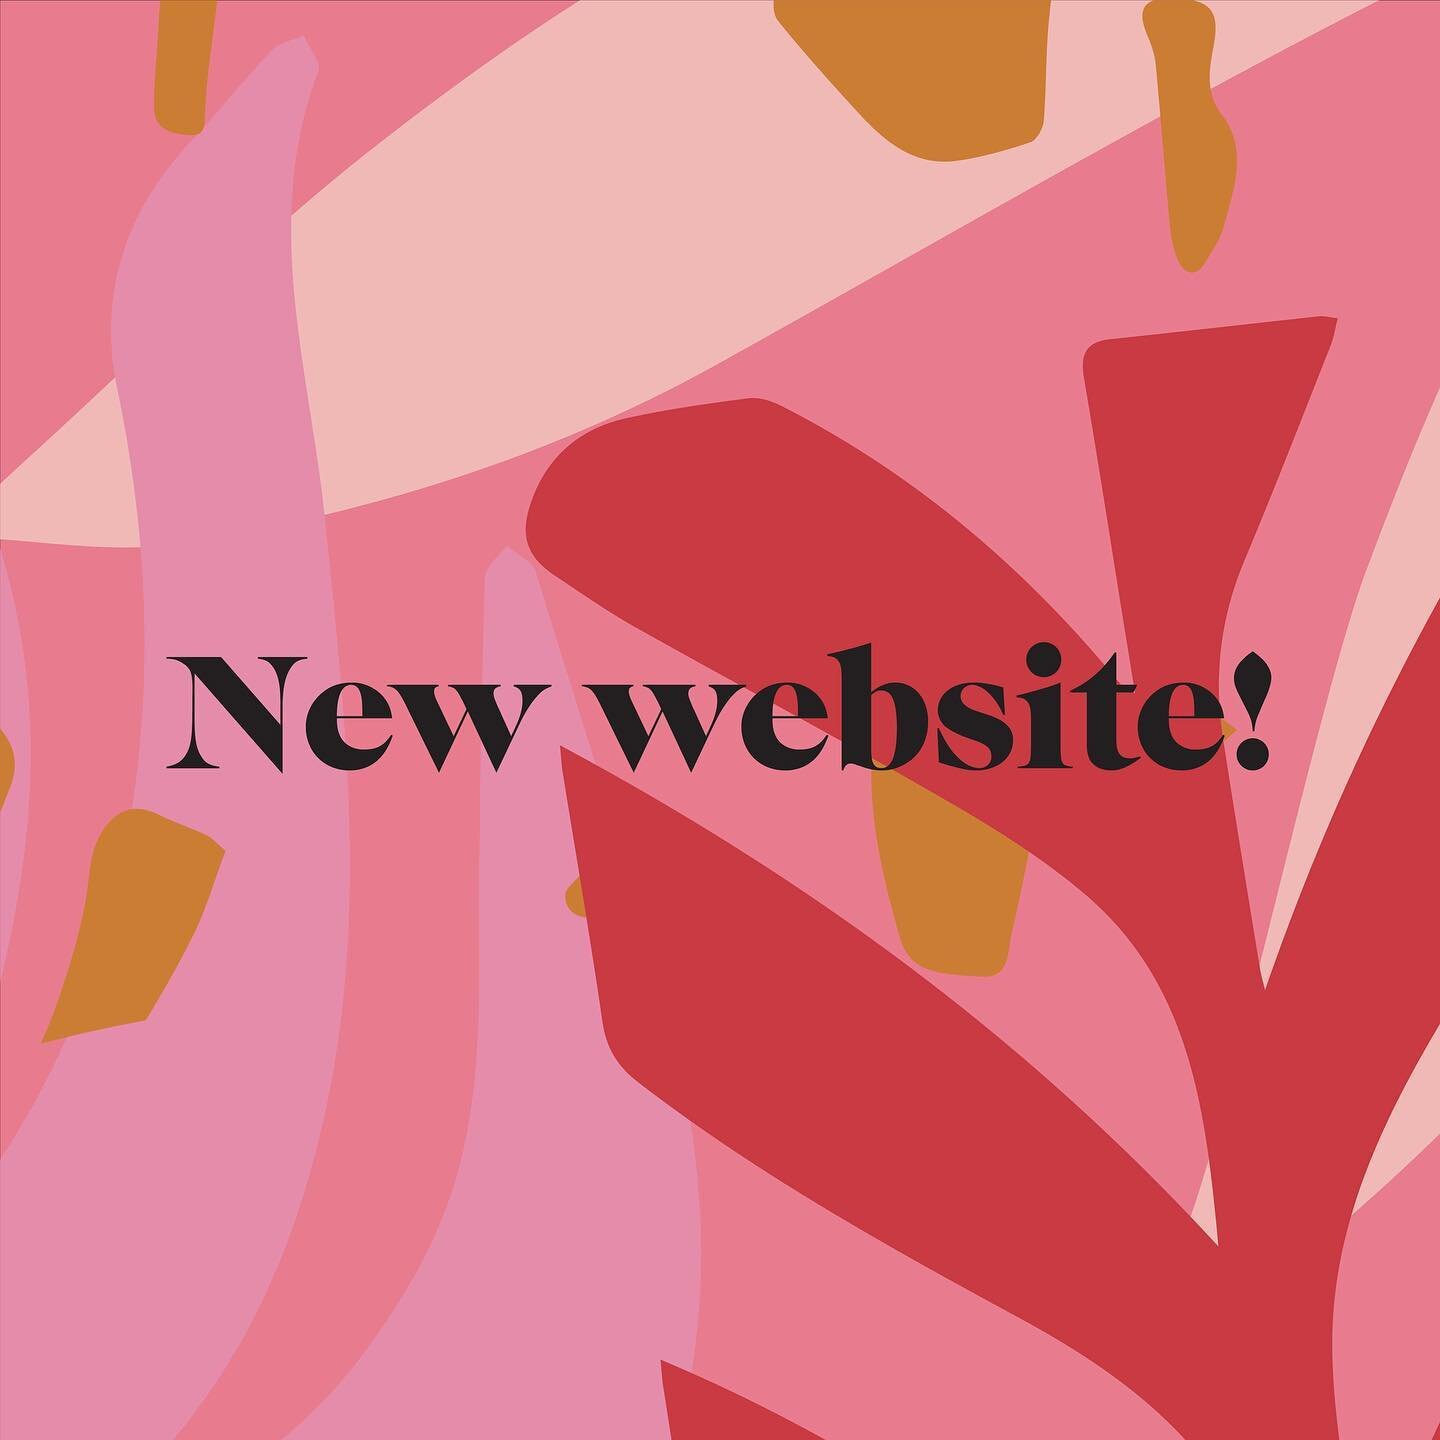 As we soon approach our 10th Birthday we have had a bit of a refresh. Check out our new website www.misskitbeautyacademy.com
Here you find everything we have to offer including loads of new treatments 🙌
#newwebsite #newbranding #refresh #misskit